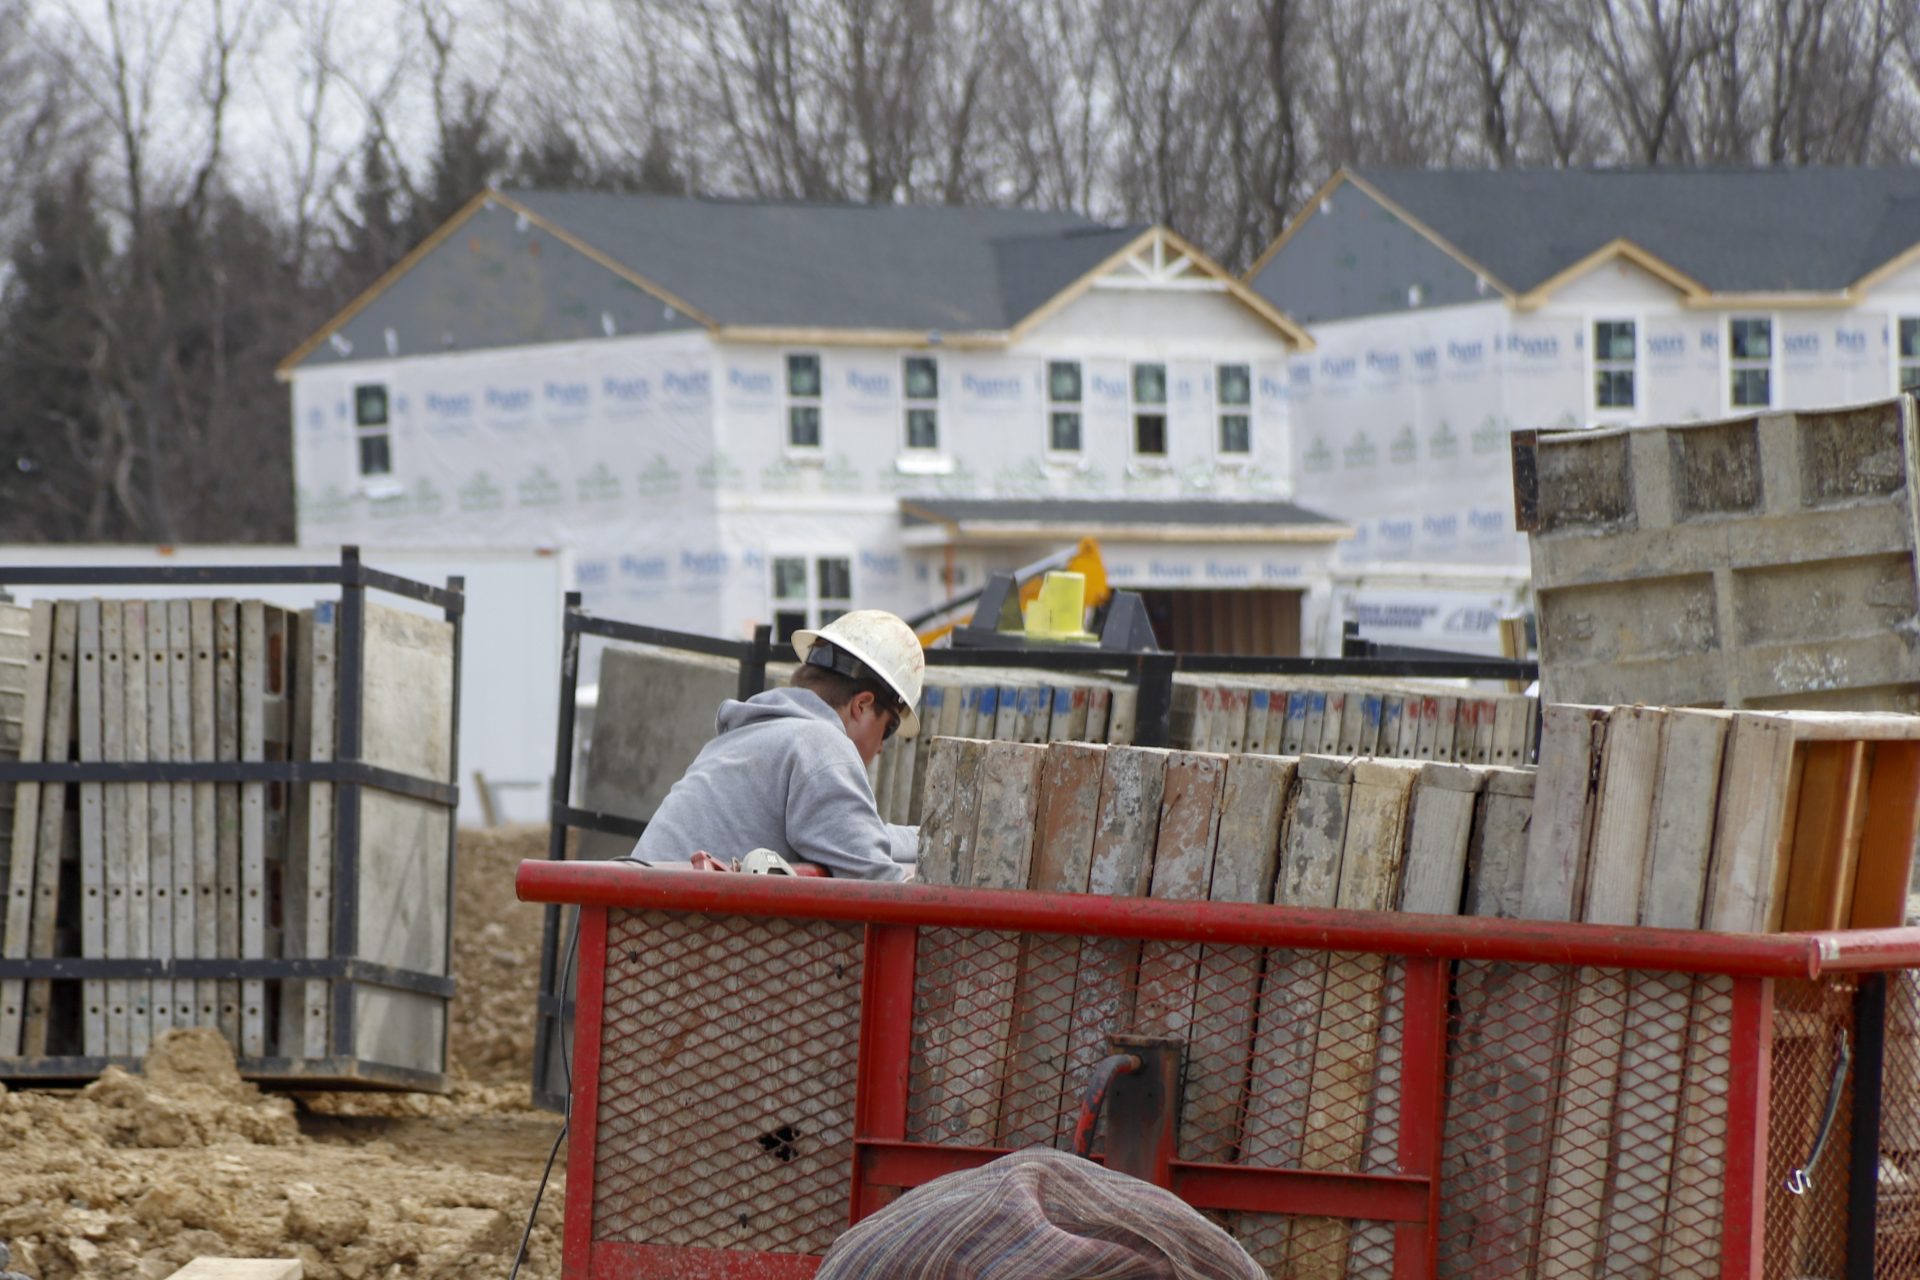 Construction continues at a housing plan in Zelienople, Pa., Wednesday, March 18, 2020. Economic and housing market trends at the start of the year both favored U.S. homebuilders' prospects for 2020. That was then. But with the coronavirus outbreak now expected to tip the U.S. into recession, the National Association of Home Builders projects that new home construction and sales will take a hit as efforts to contain its spread disrupt large swaths of the economy.

Keith Srakocic / AP Photo